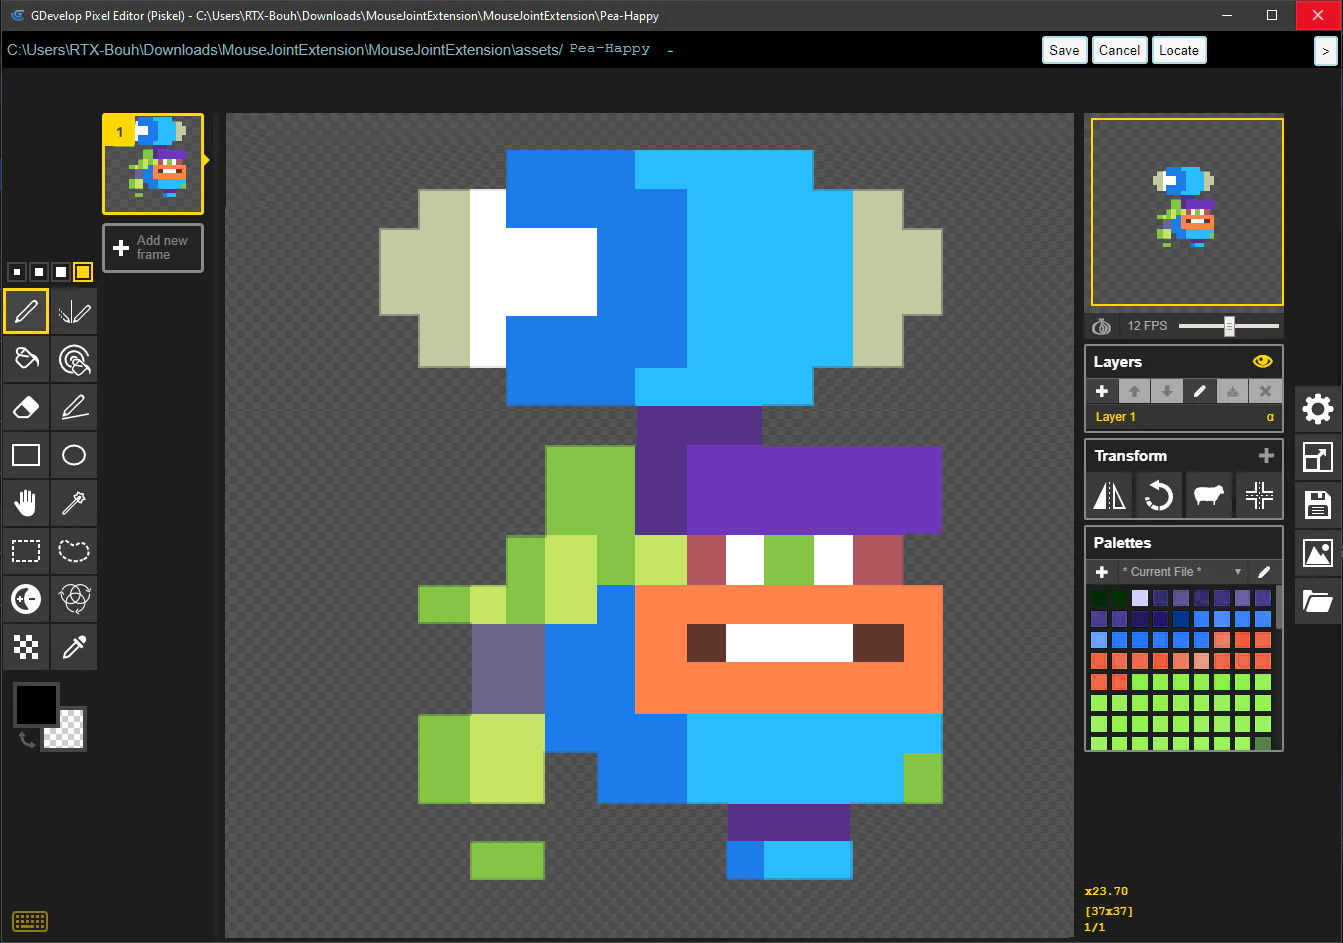 GDevelop is Bundled with Piskel, an Open-Source Sprite Editor.